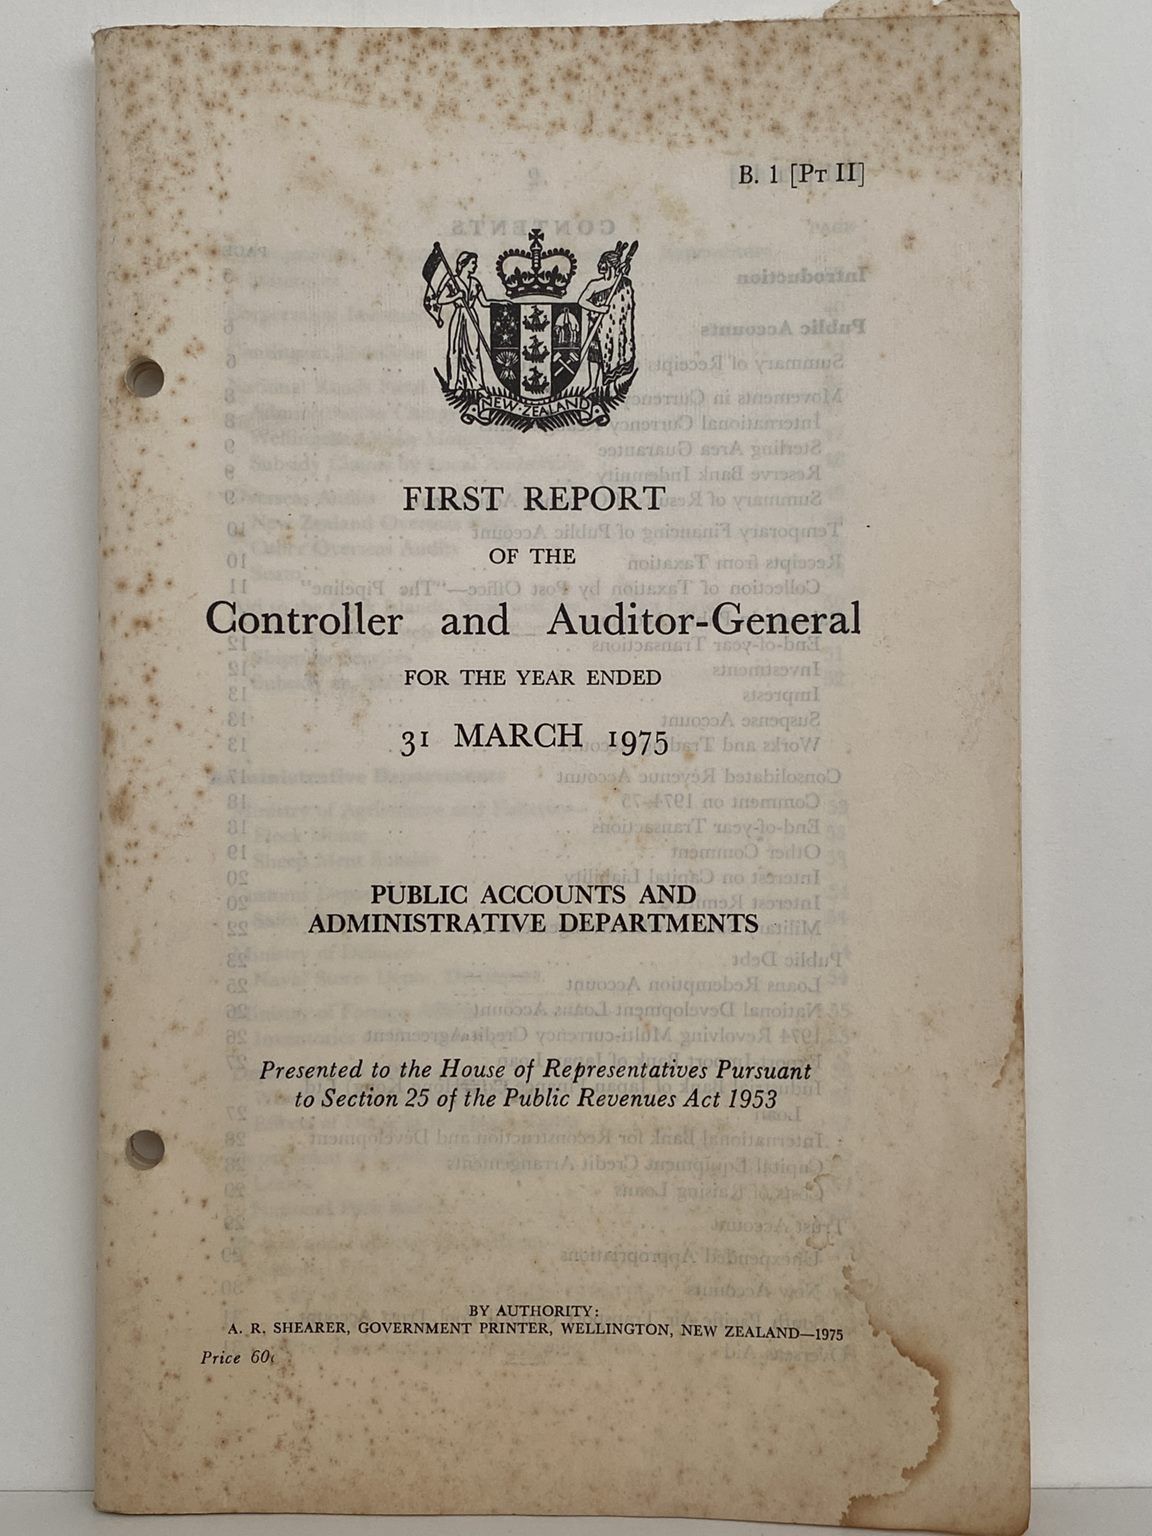 First Report of the CONTROLLER and AUDITOR-GENERAL March 1975